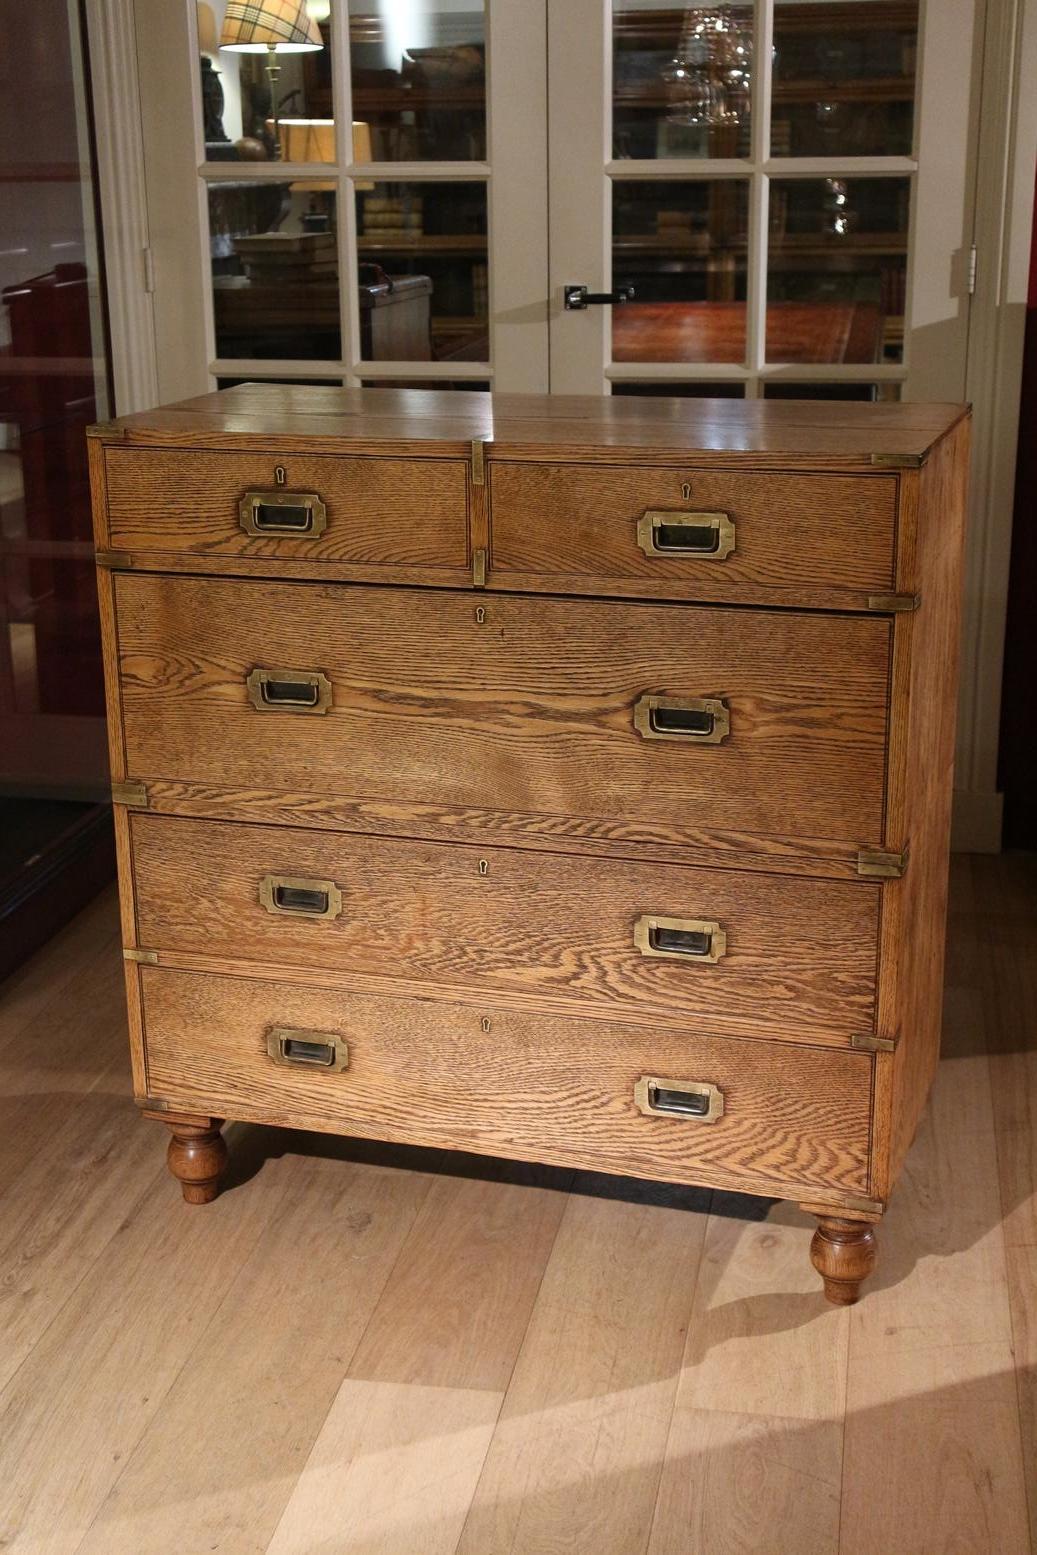 Here we have a fine military chest in oak. The chest is made in two sections for the ease of transportation, either by sea or pack horse and mule.
This particular chest would have been made for an officer for Campaign.
The chest of drawers has the